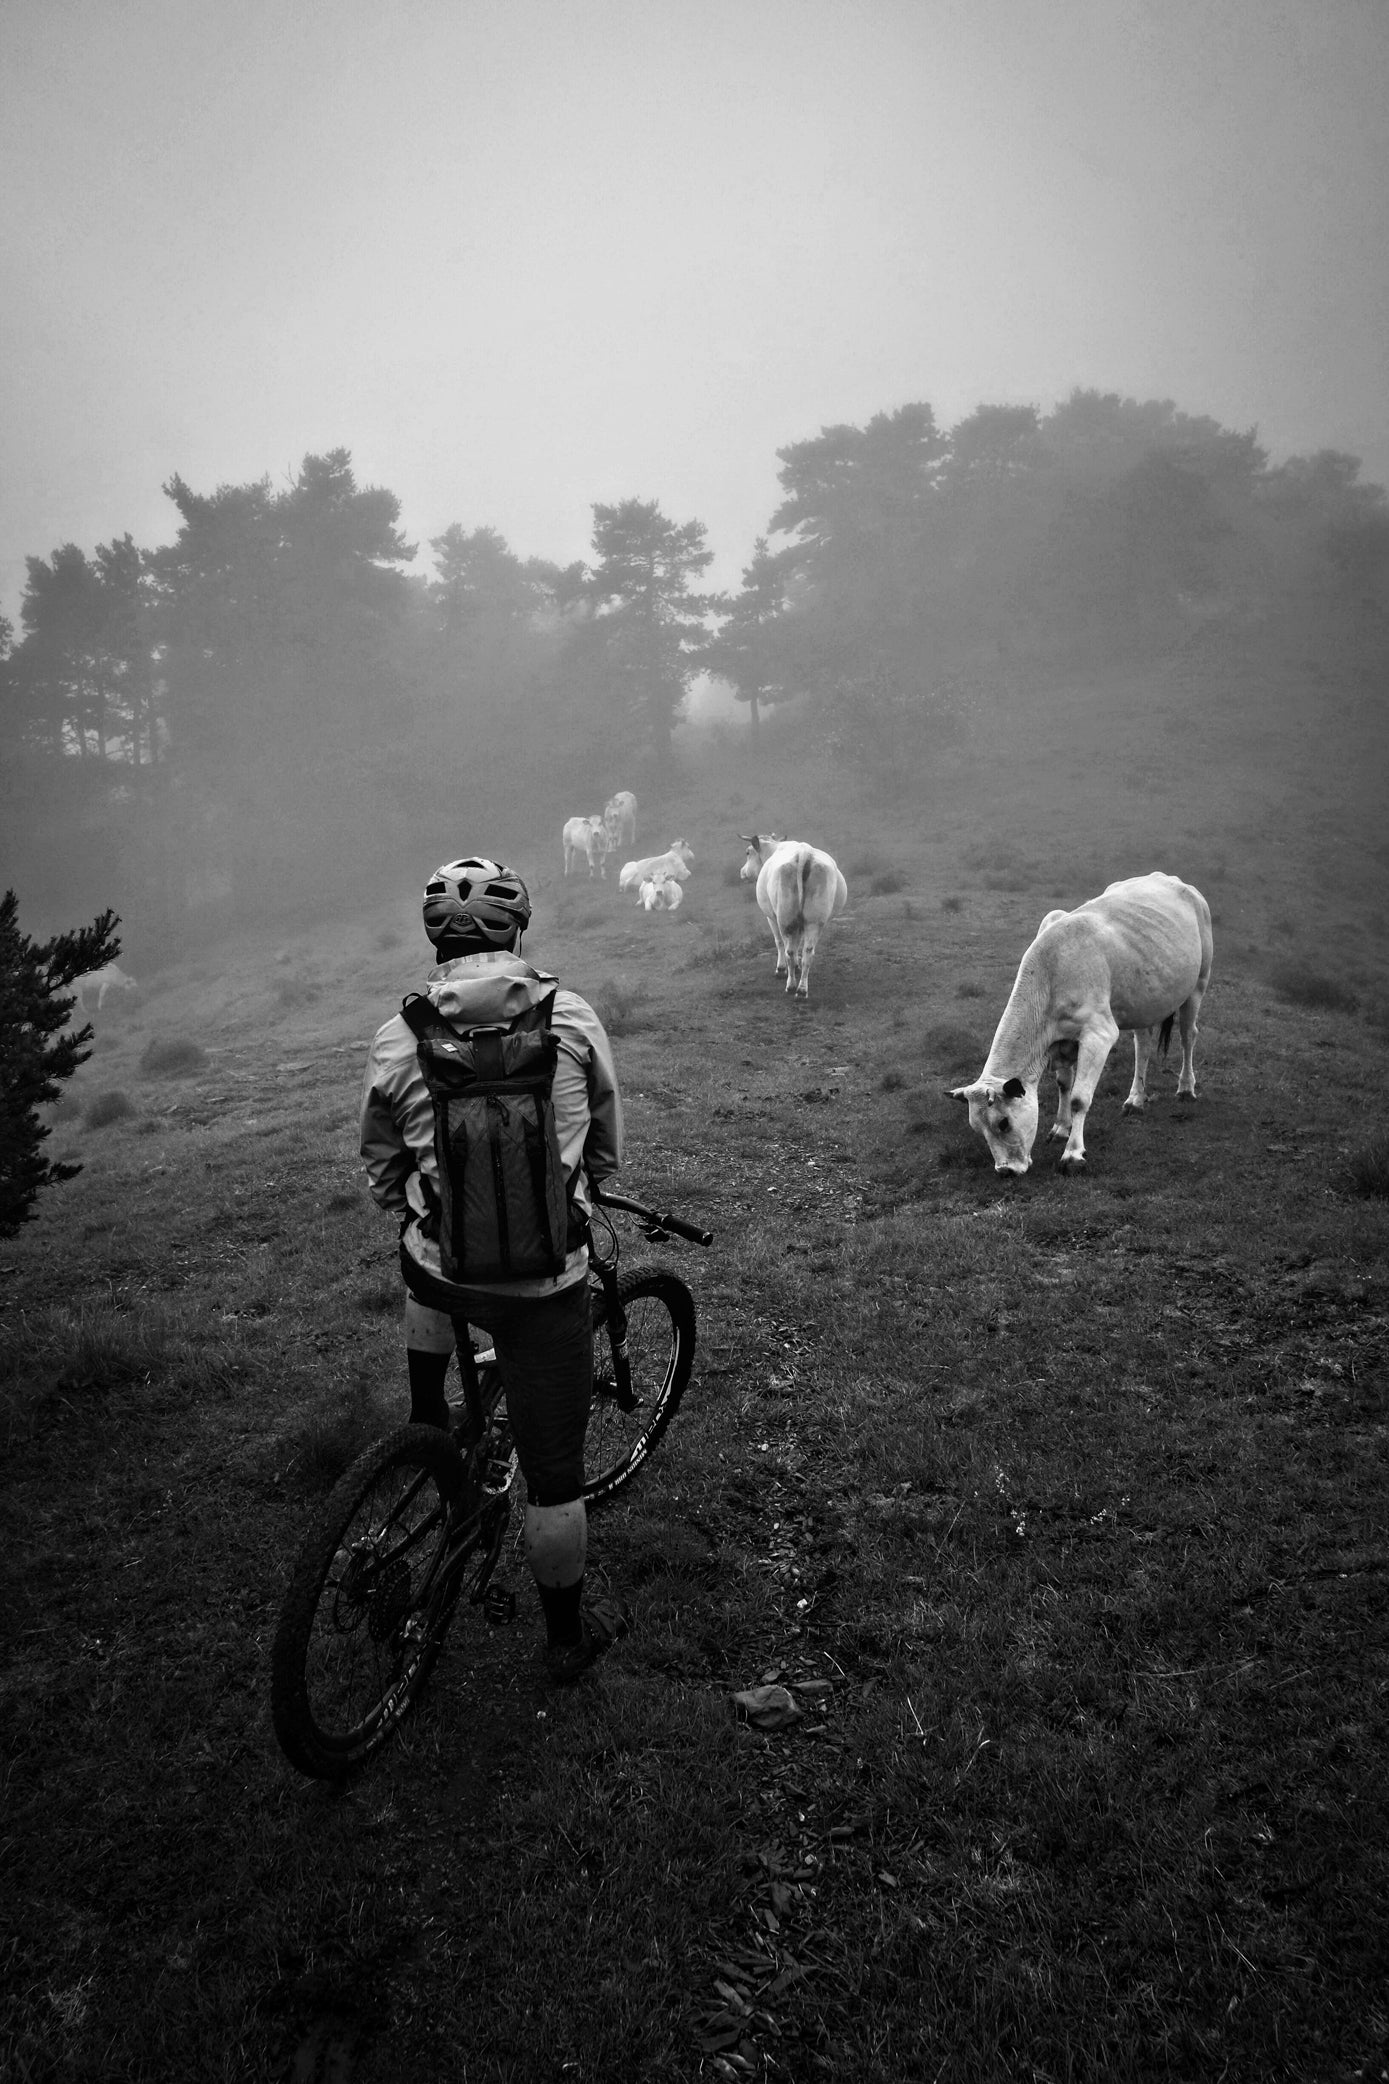 Mission Workshop Field Test : The Guide to Getting Lost - Summer 2014 - Mountain Bike Ride with SRAM, Golden Saddle Cyclery, Santa Cruz Bicycles, Sospel MTB, and John Prolly at The Radavist